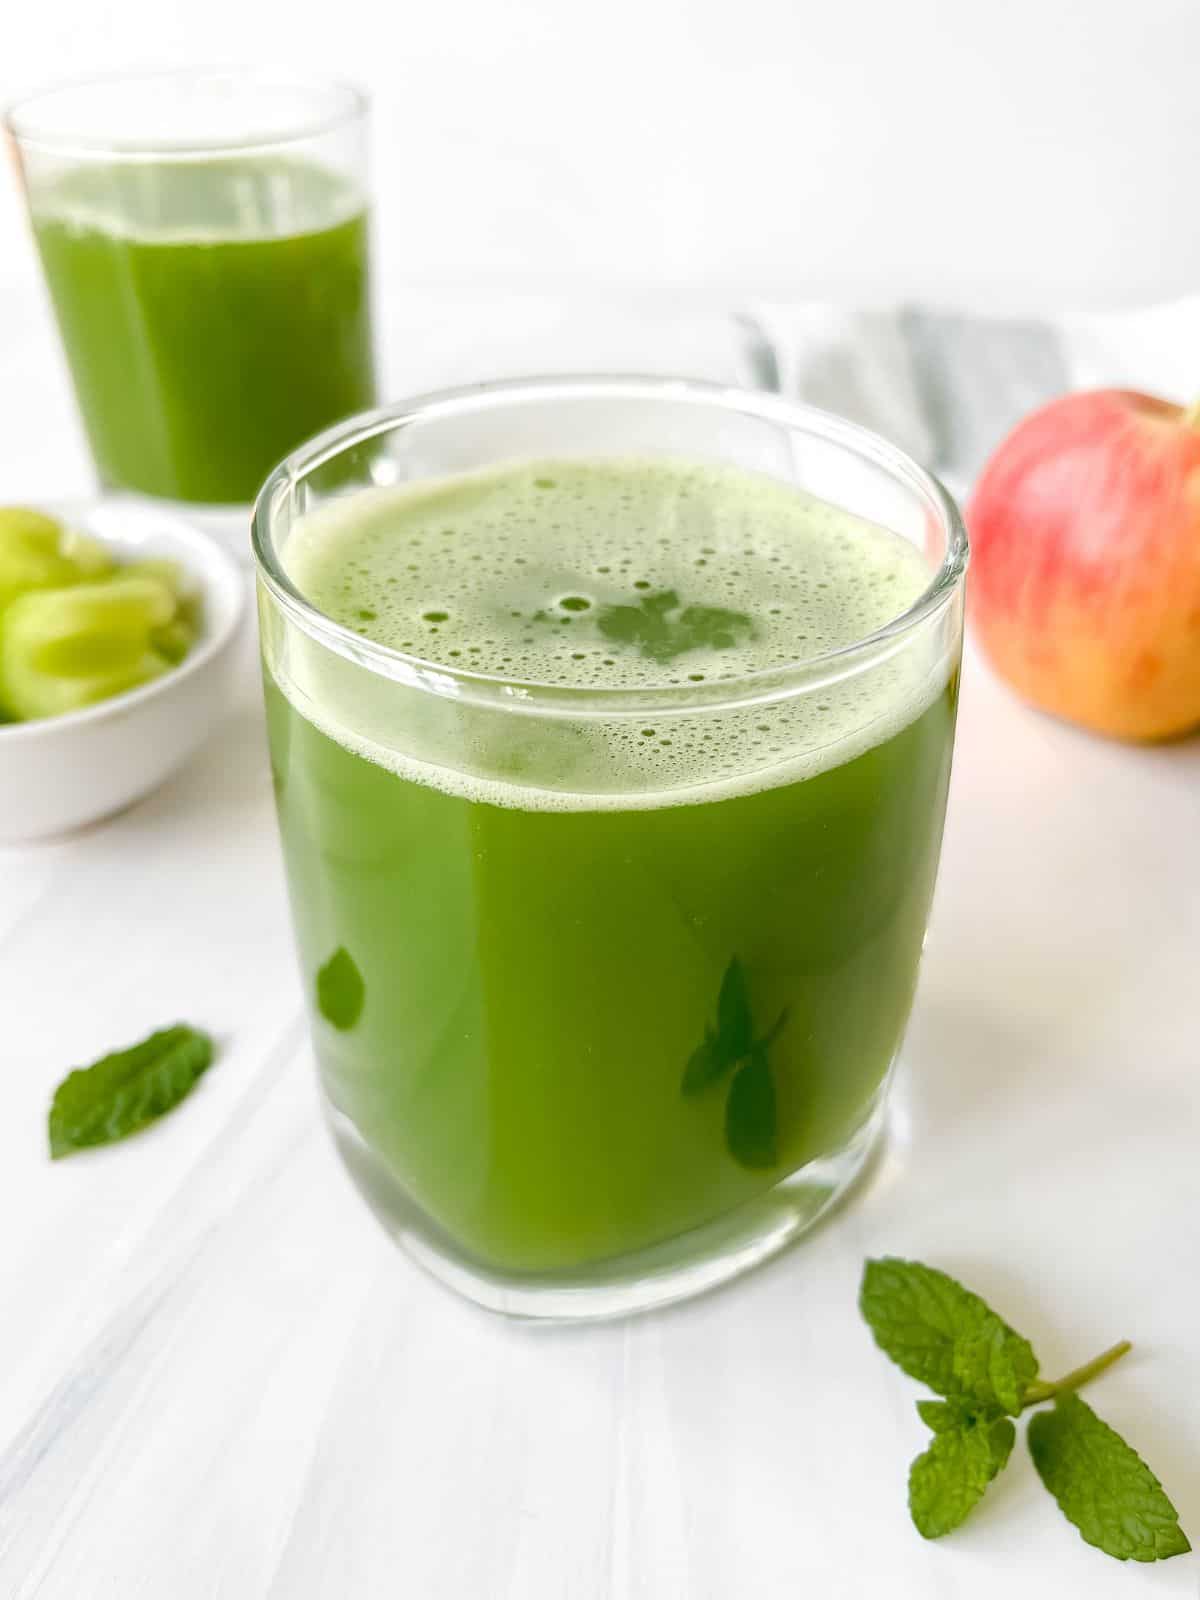 celery cucumber juice in two glasses next to mint leaves and a red apple.